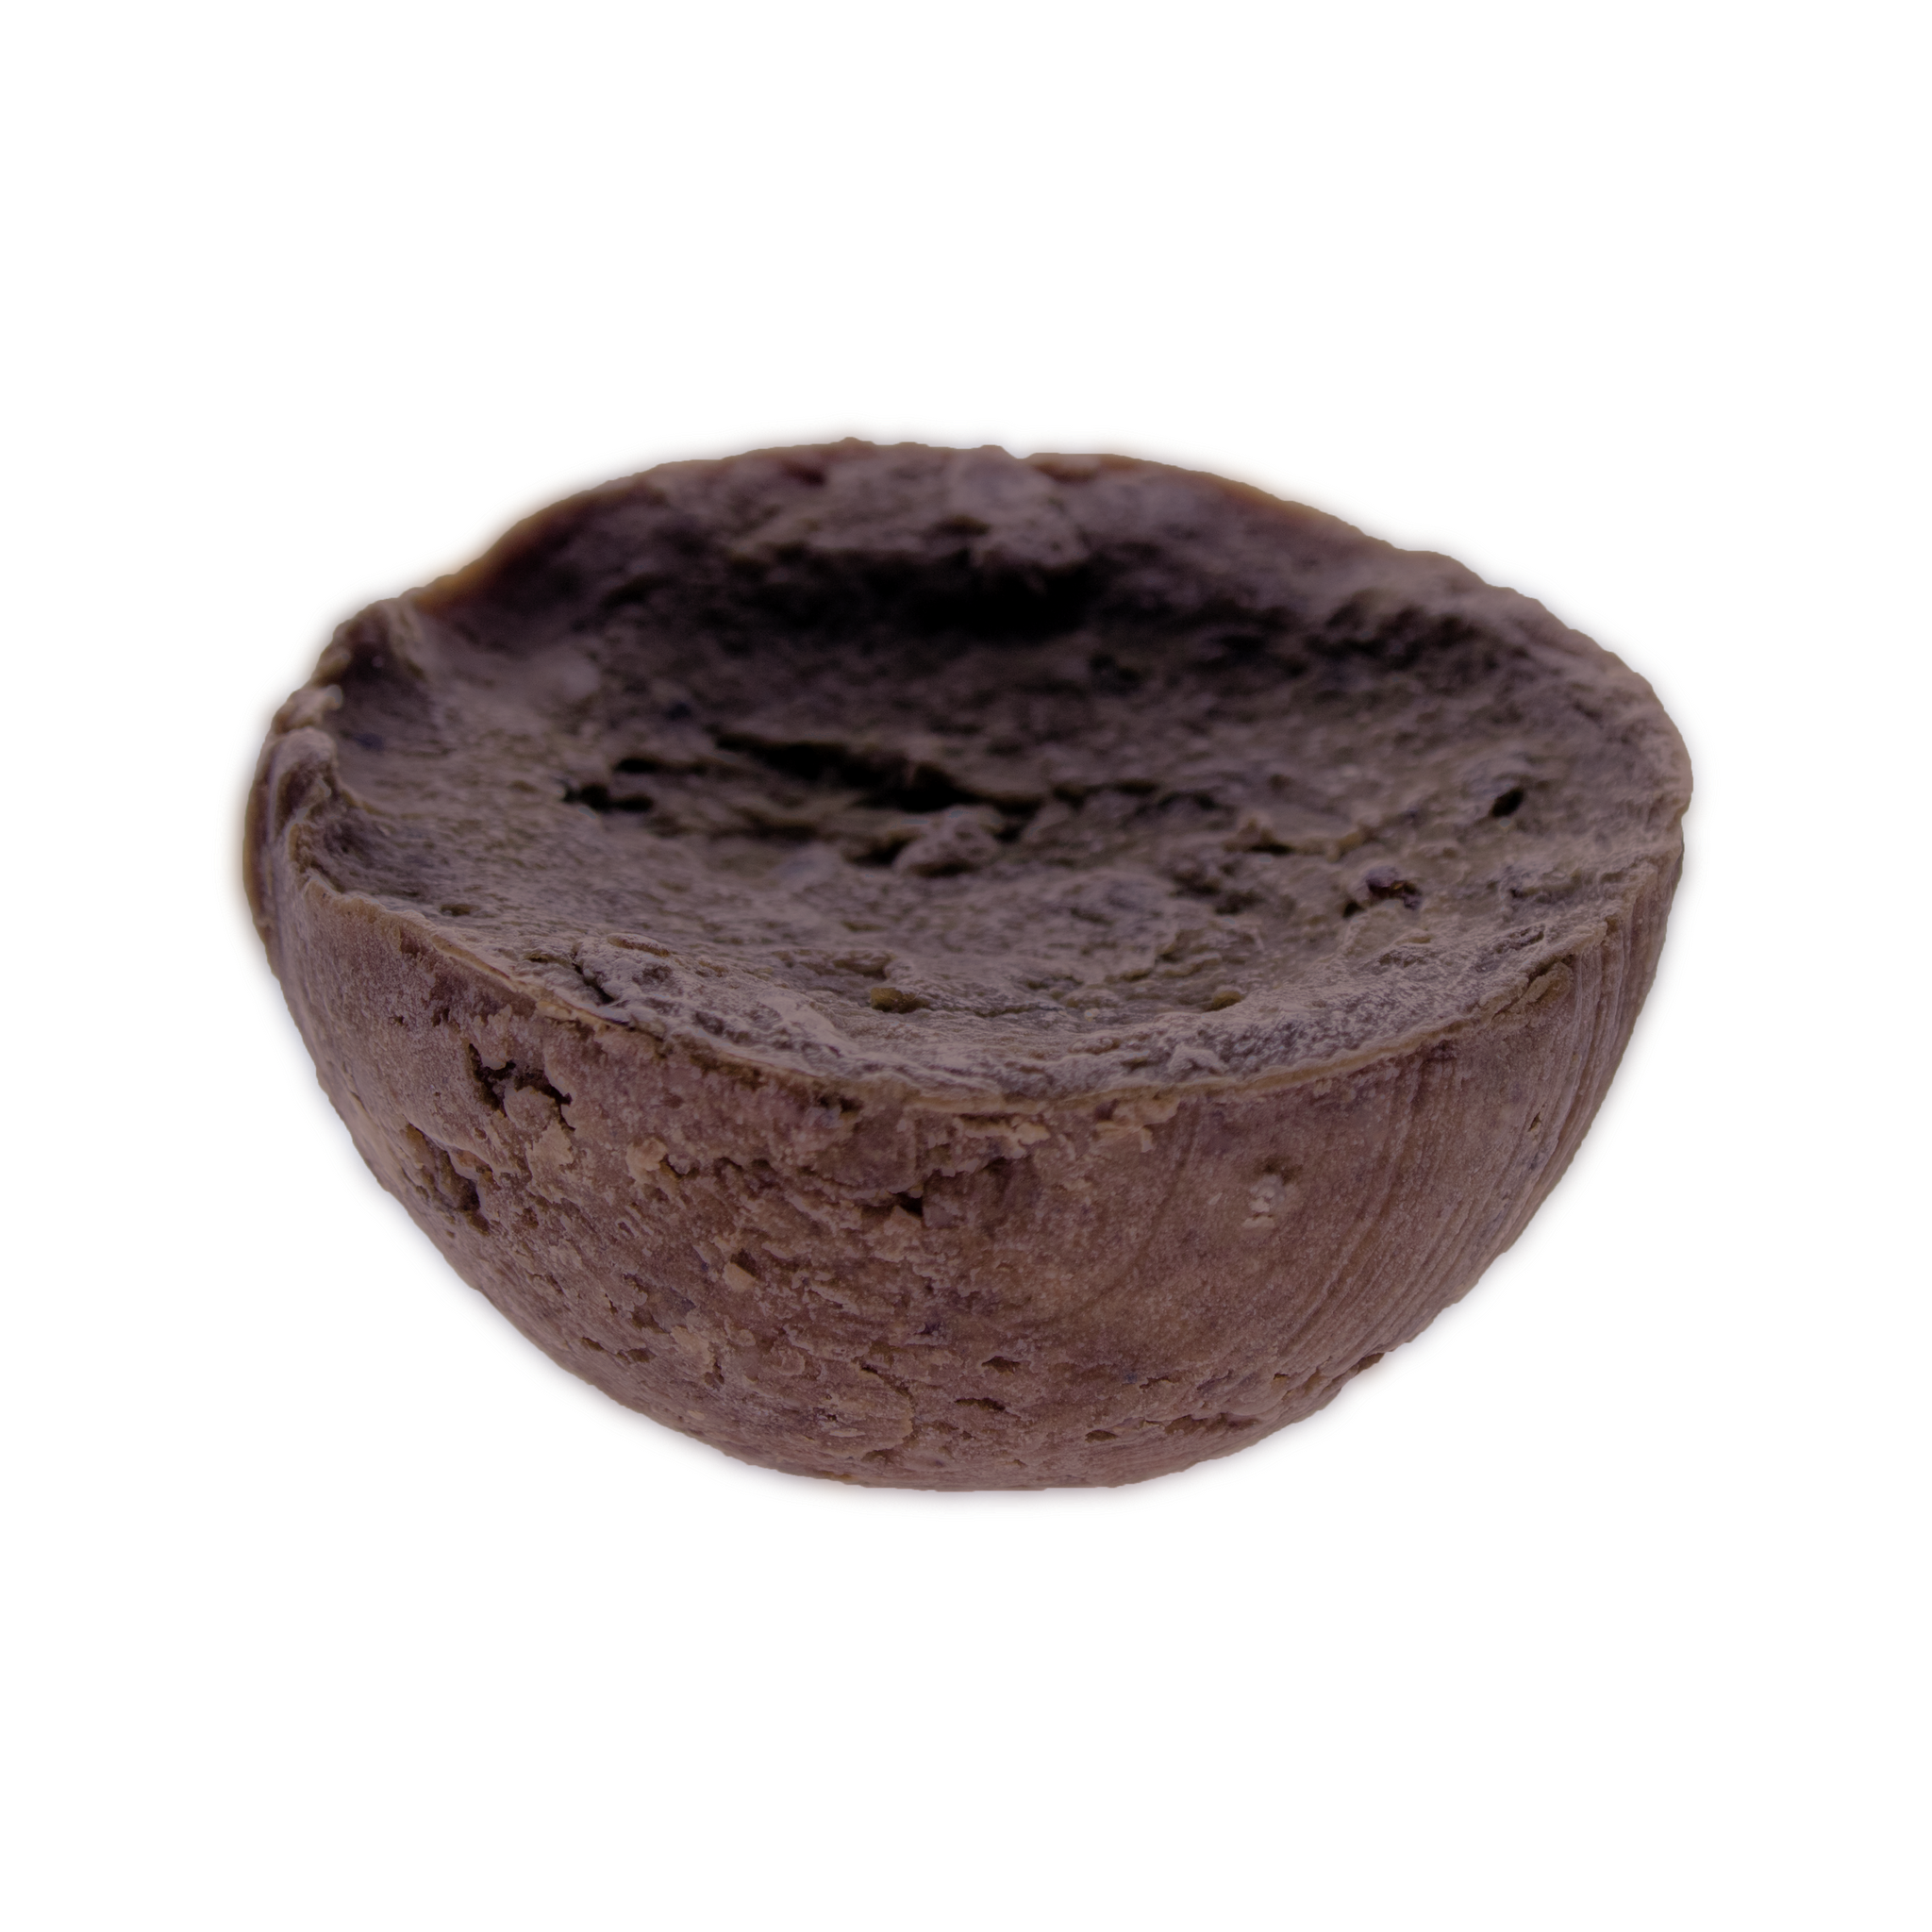 African Black Soap Shampoo Bar Cleanser Soap Care